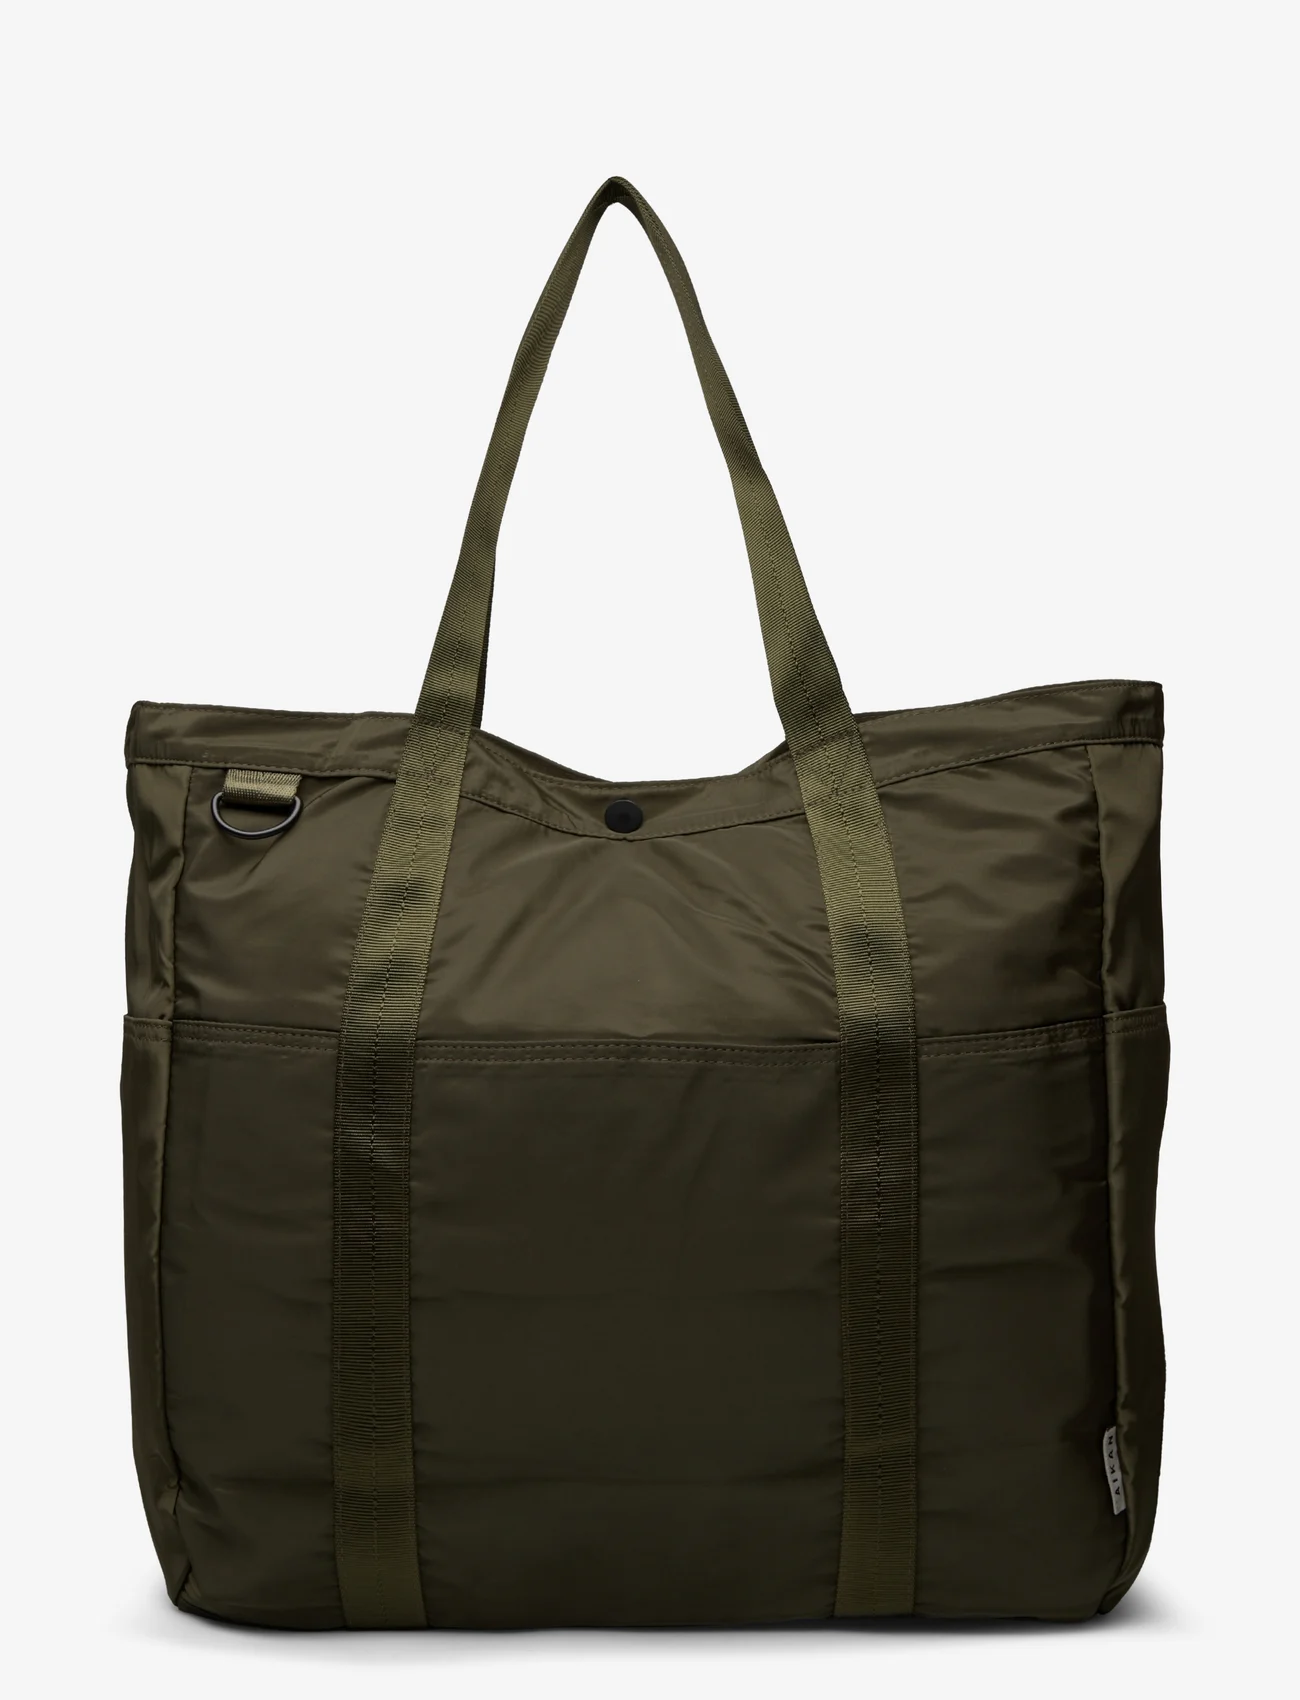 Taikan - Sherpa - carry bags - olive - 1